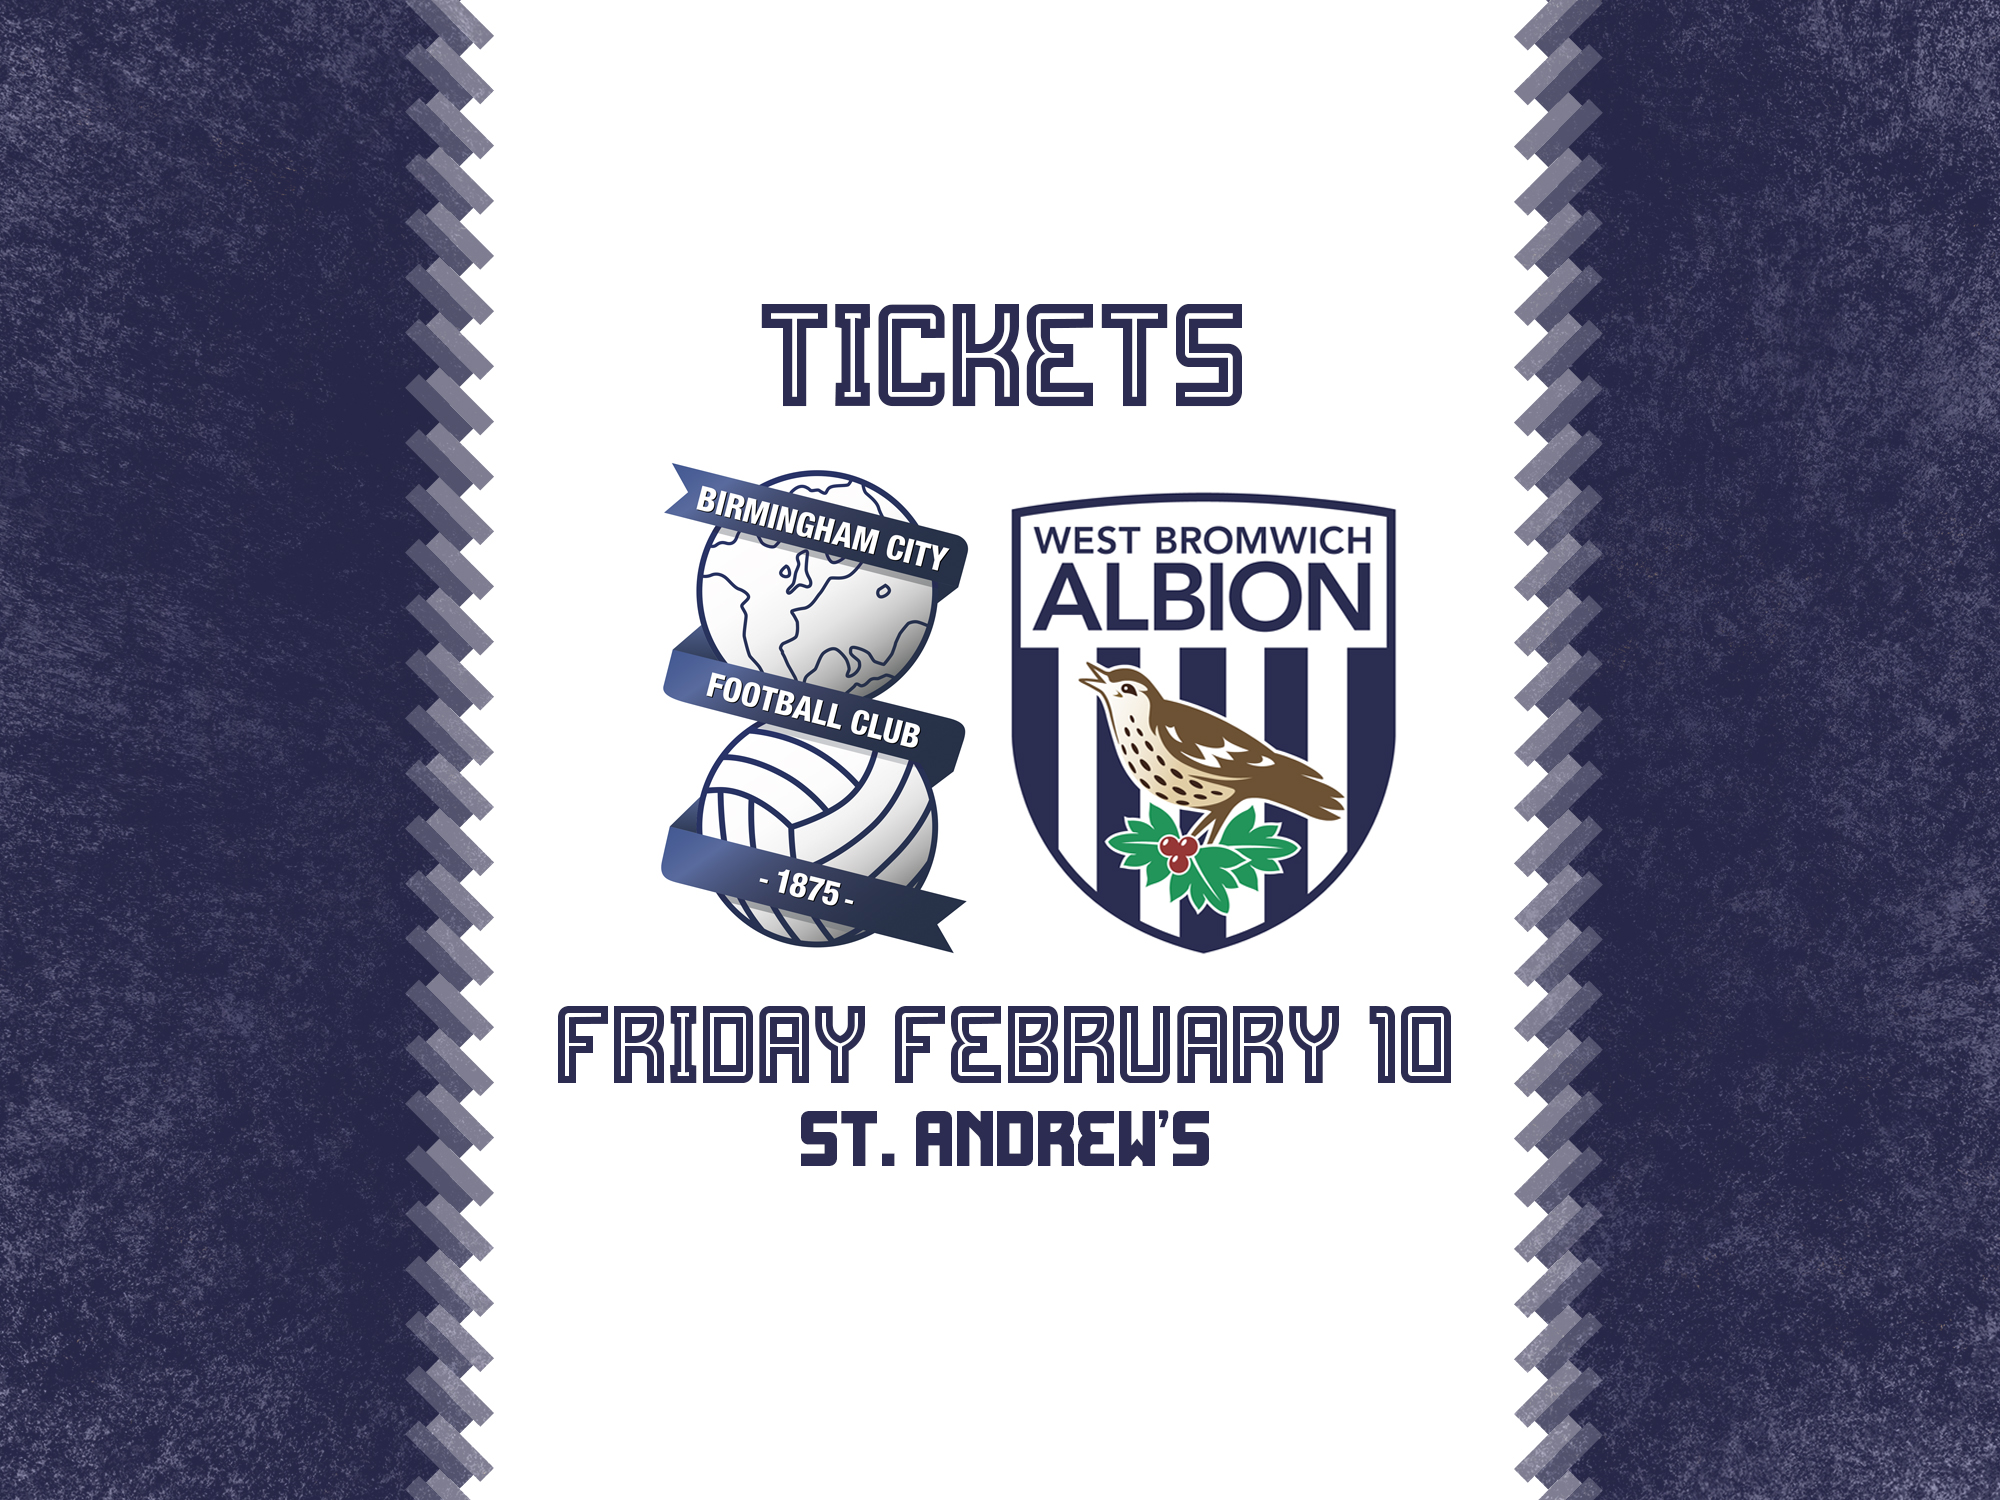 A ticket graphic for Albion's trip to Birmingham City